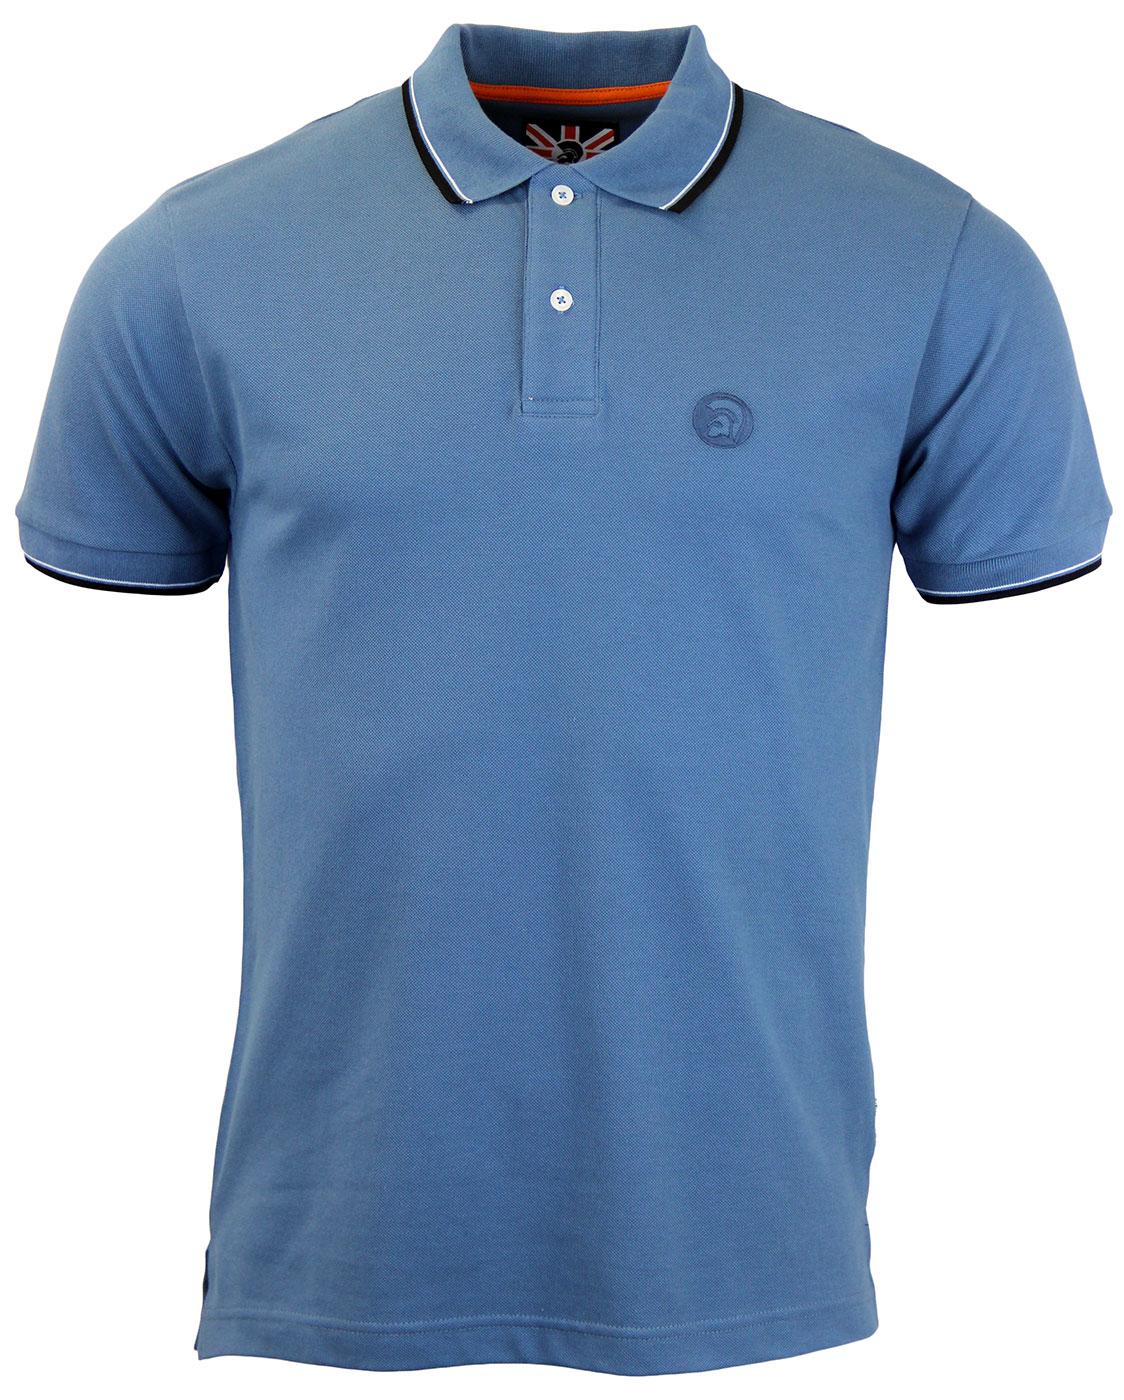 TROJAN RECORDS Retro Mod Tipped Classic Pique Polo in Air Force